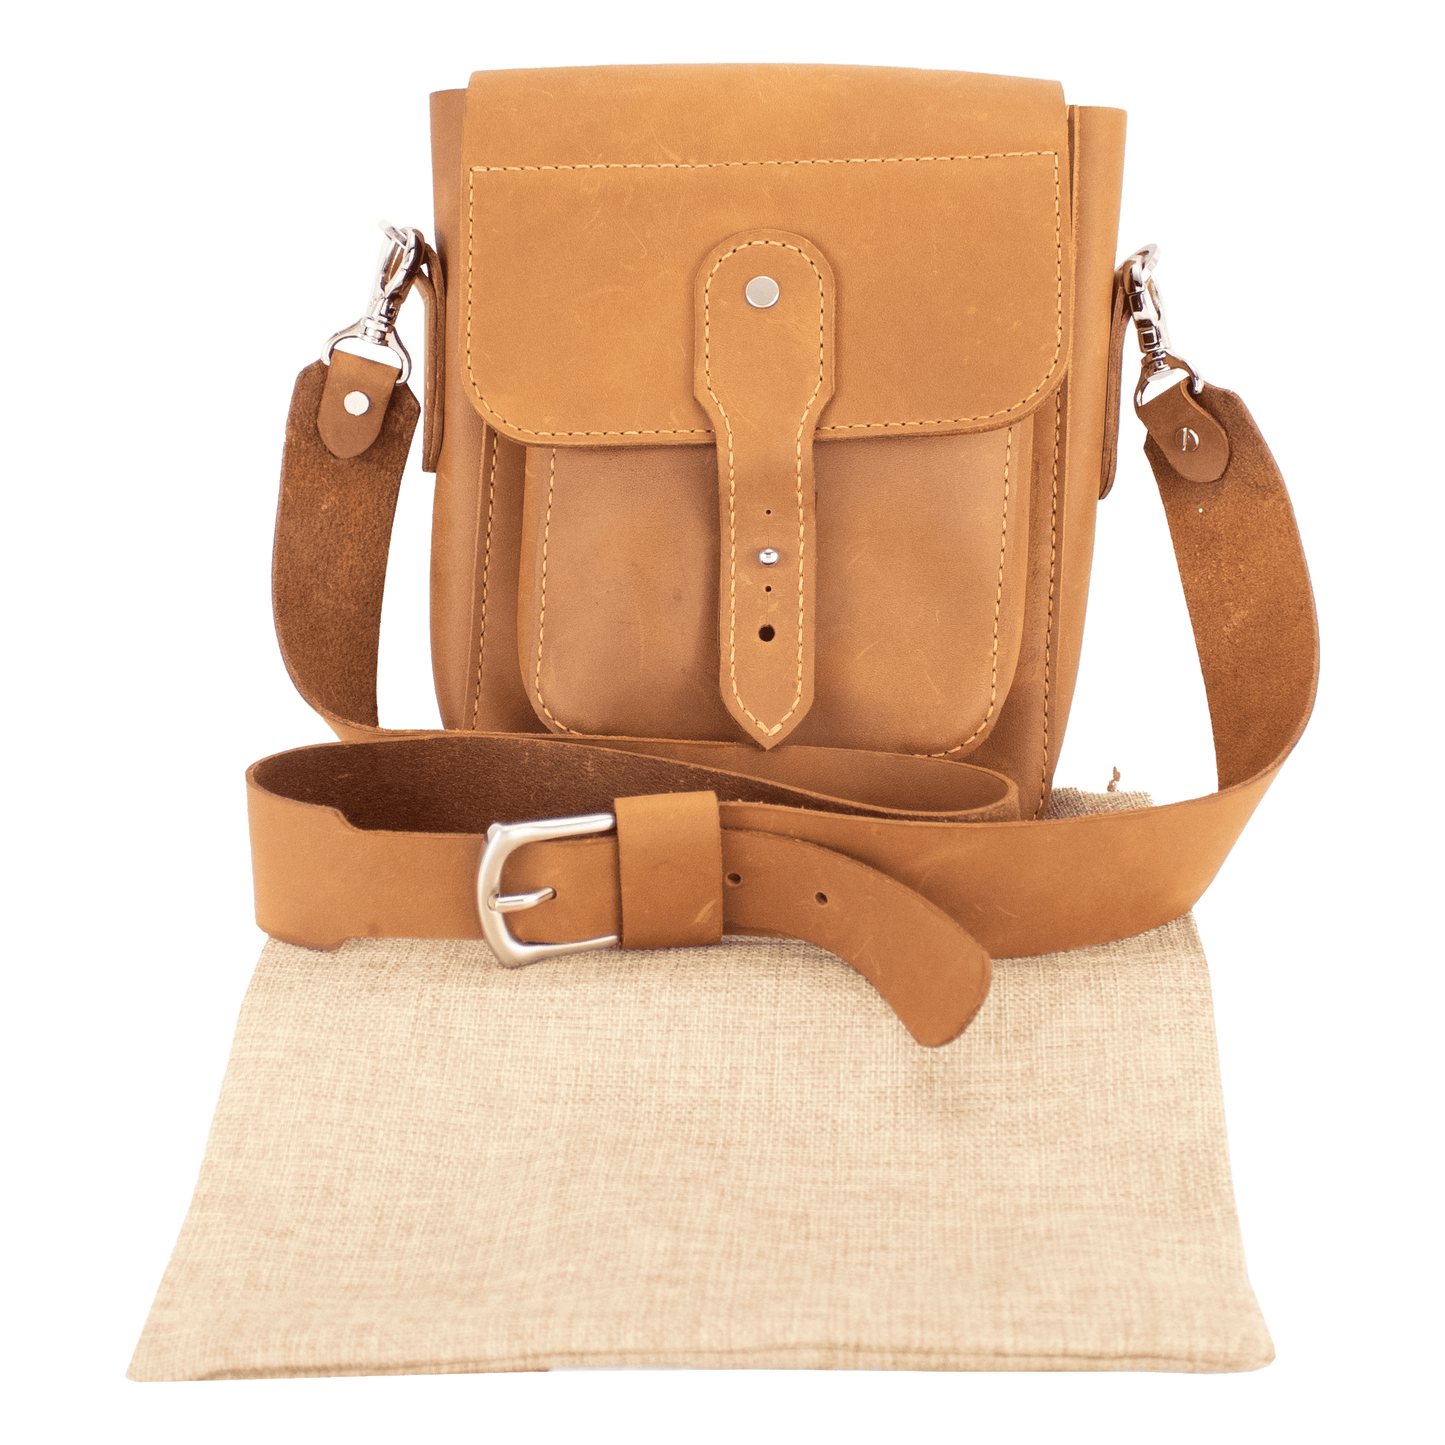 Handcrafted Brown Leather Structured Satchel Purse